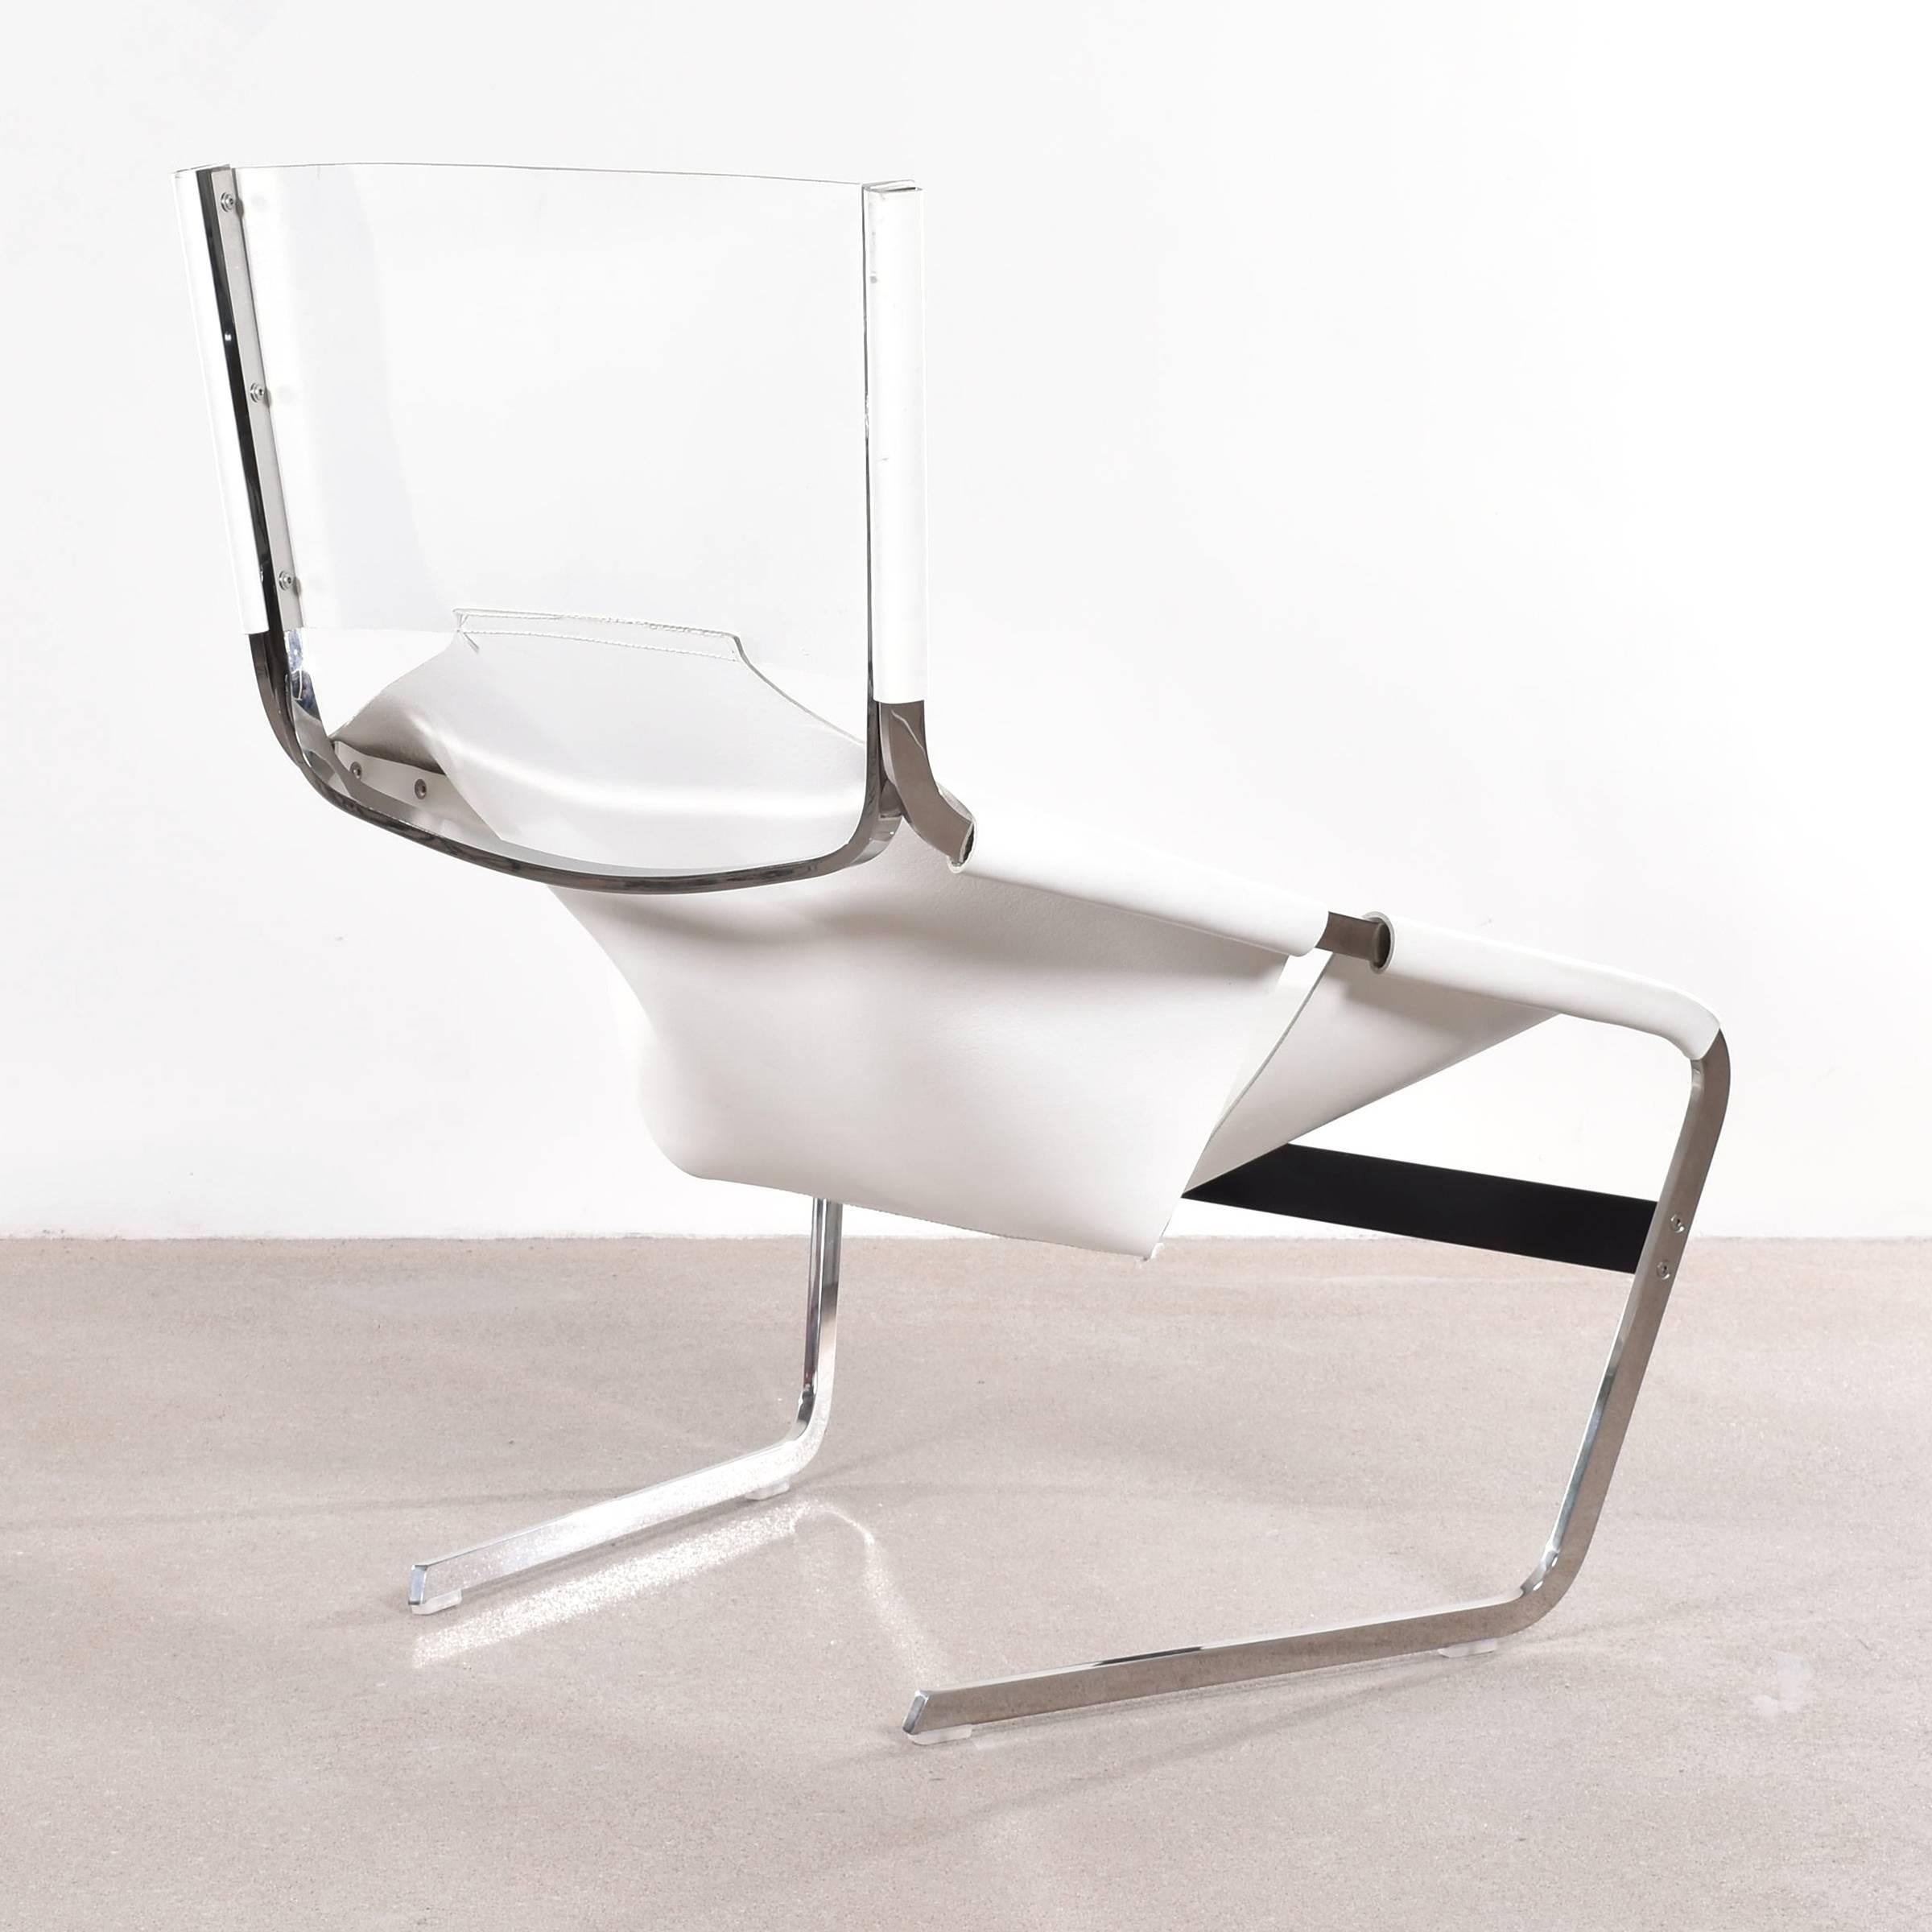 Sturdy, massive and comfortable lounge chair. Very good original condition. Signed with Artifort metal label.

Free shipping for European destinations!

We strive for a high level of service and offer: White glove shipping, parcel shipping and